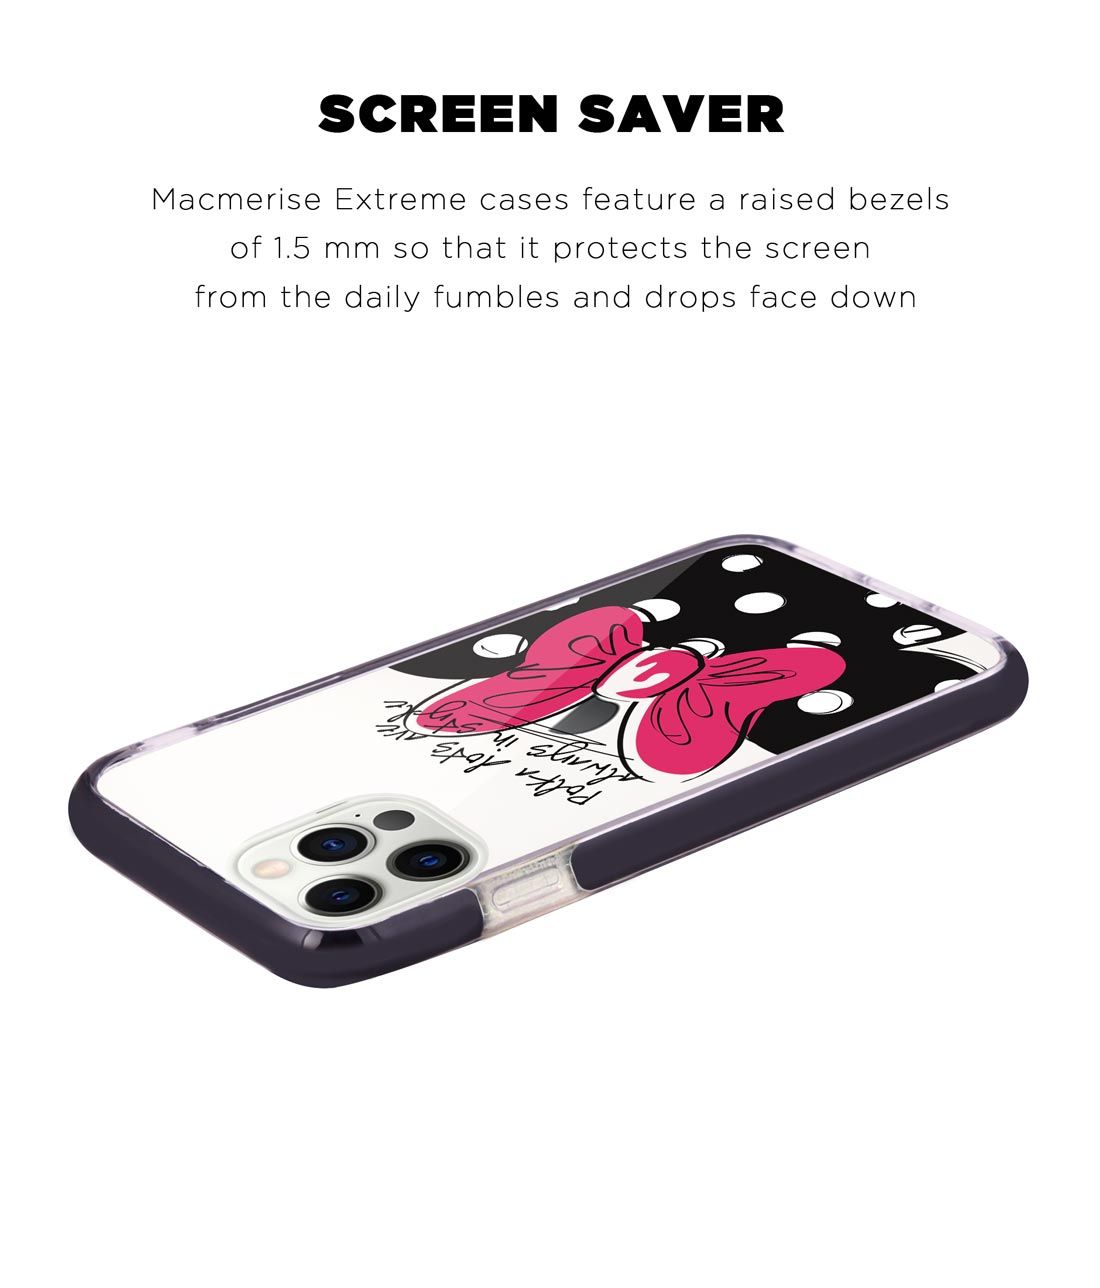 Polka Minnie - Extreme Case for iPhone 12 Pro Max